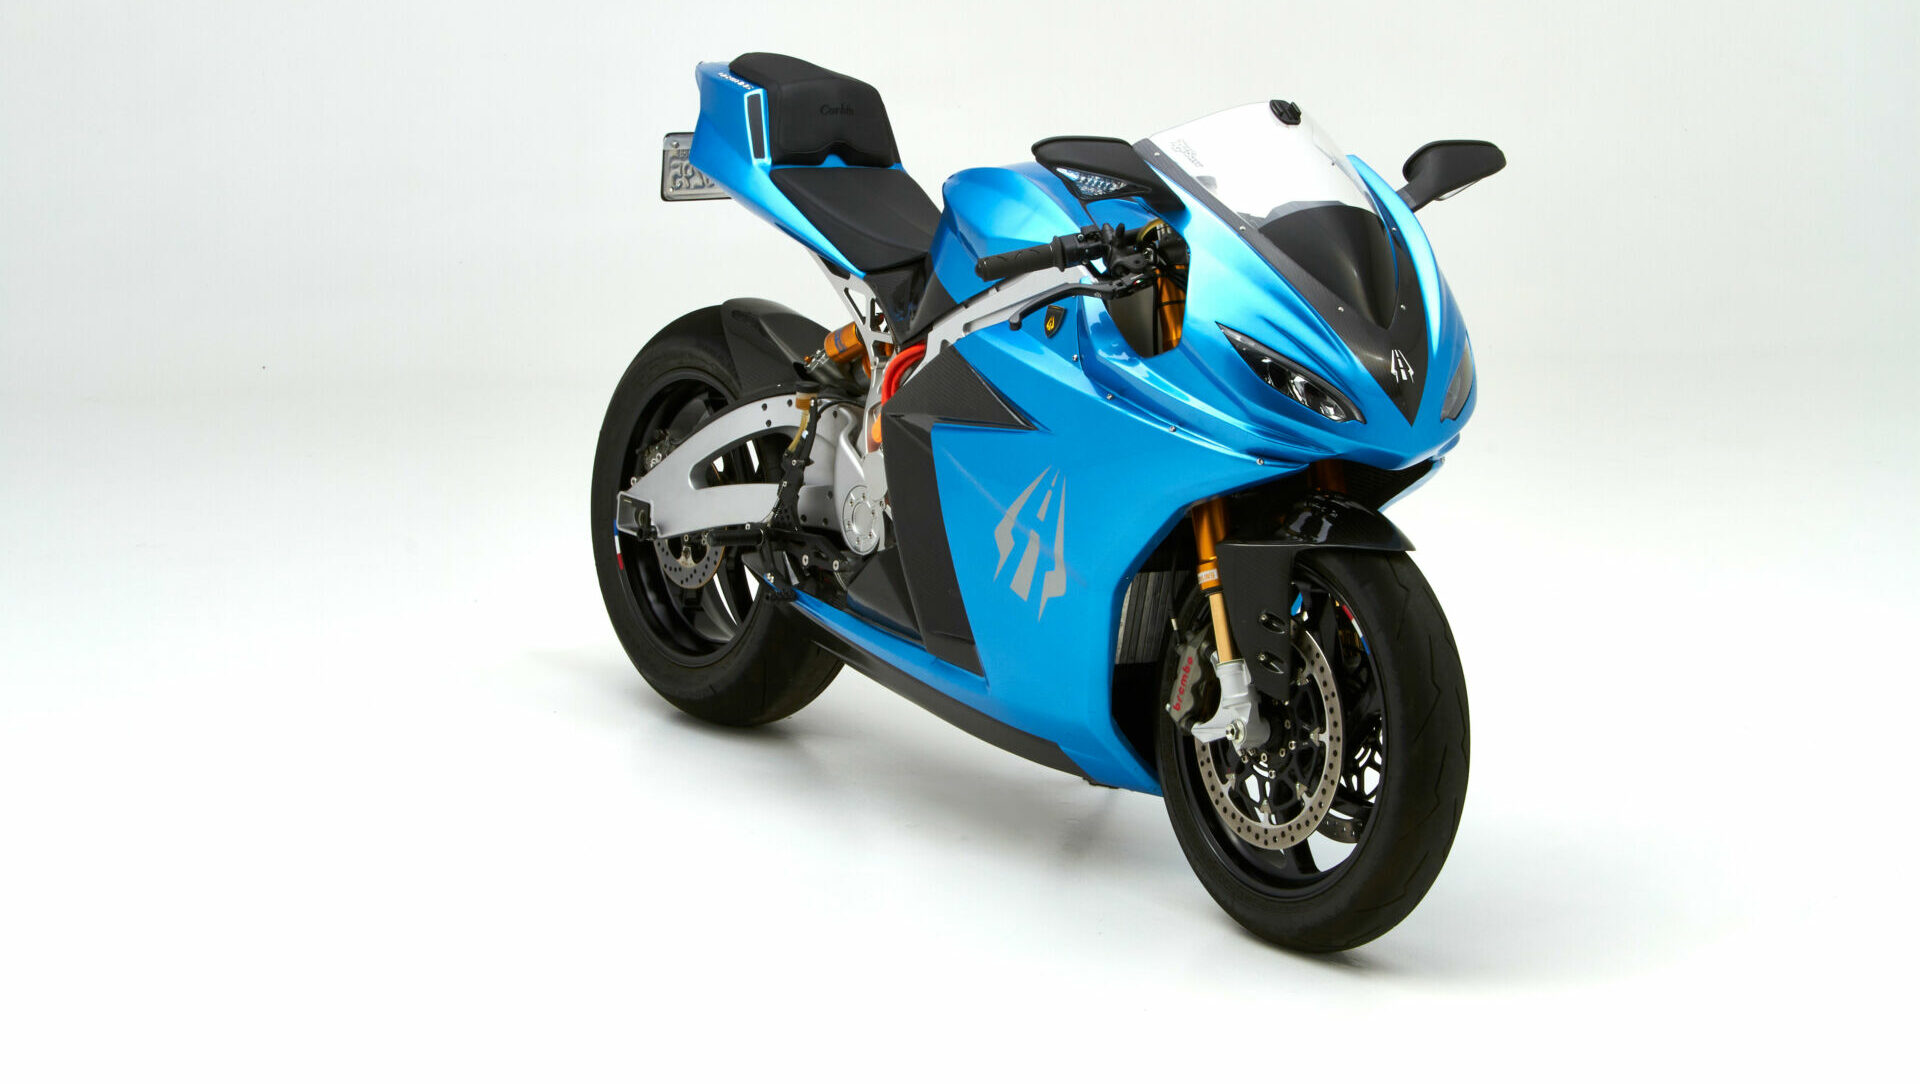 A Lightning Motorcycles electric motorcycle. Photo courtesy Lightning Motorcycles.